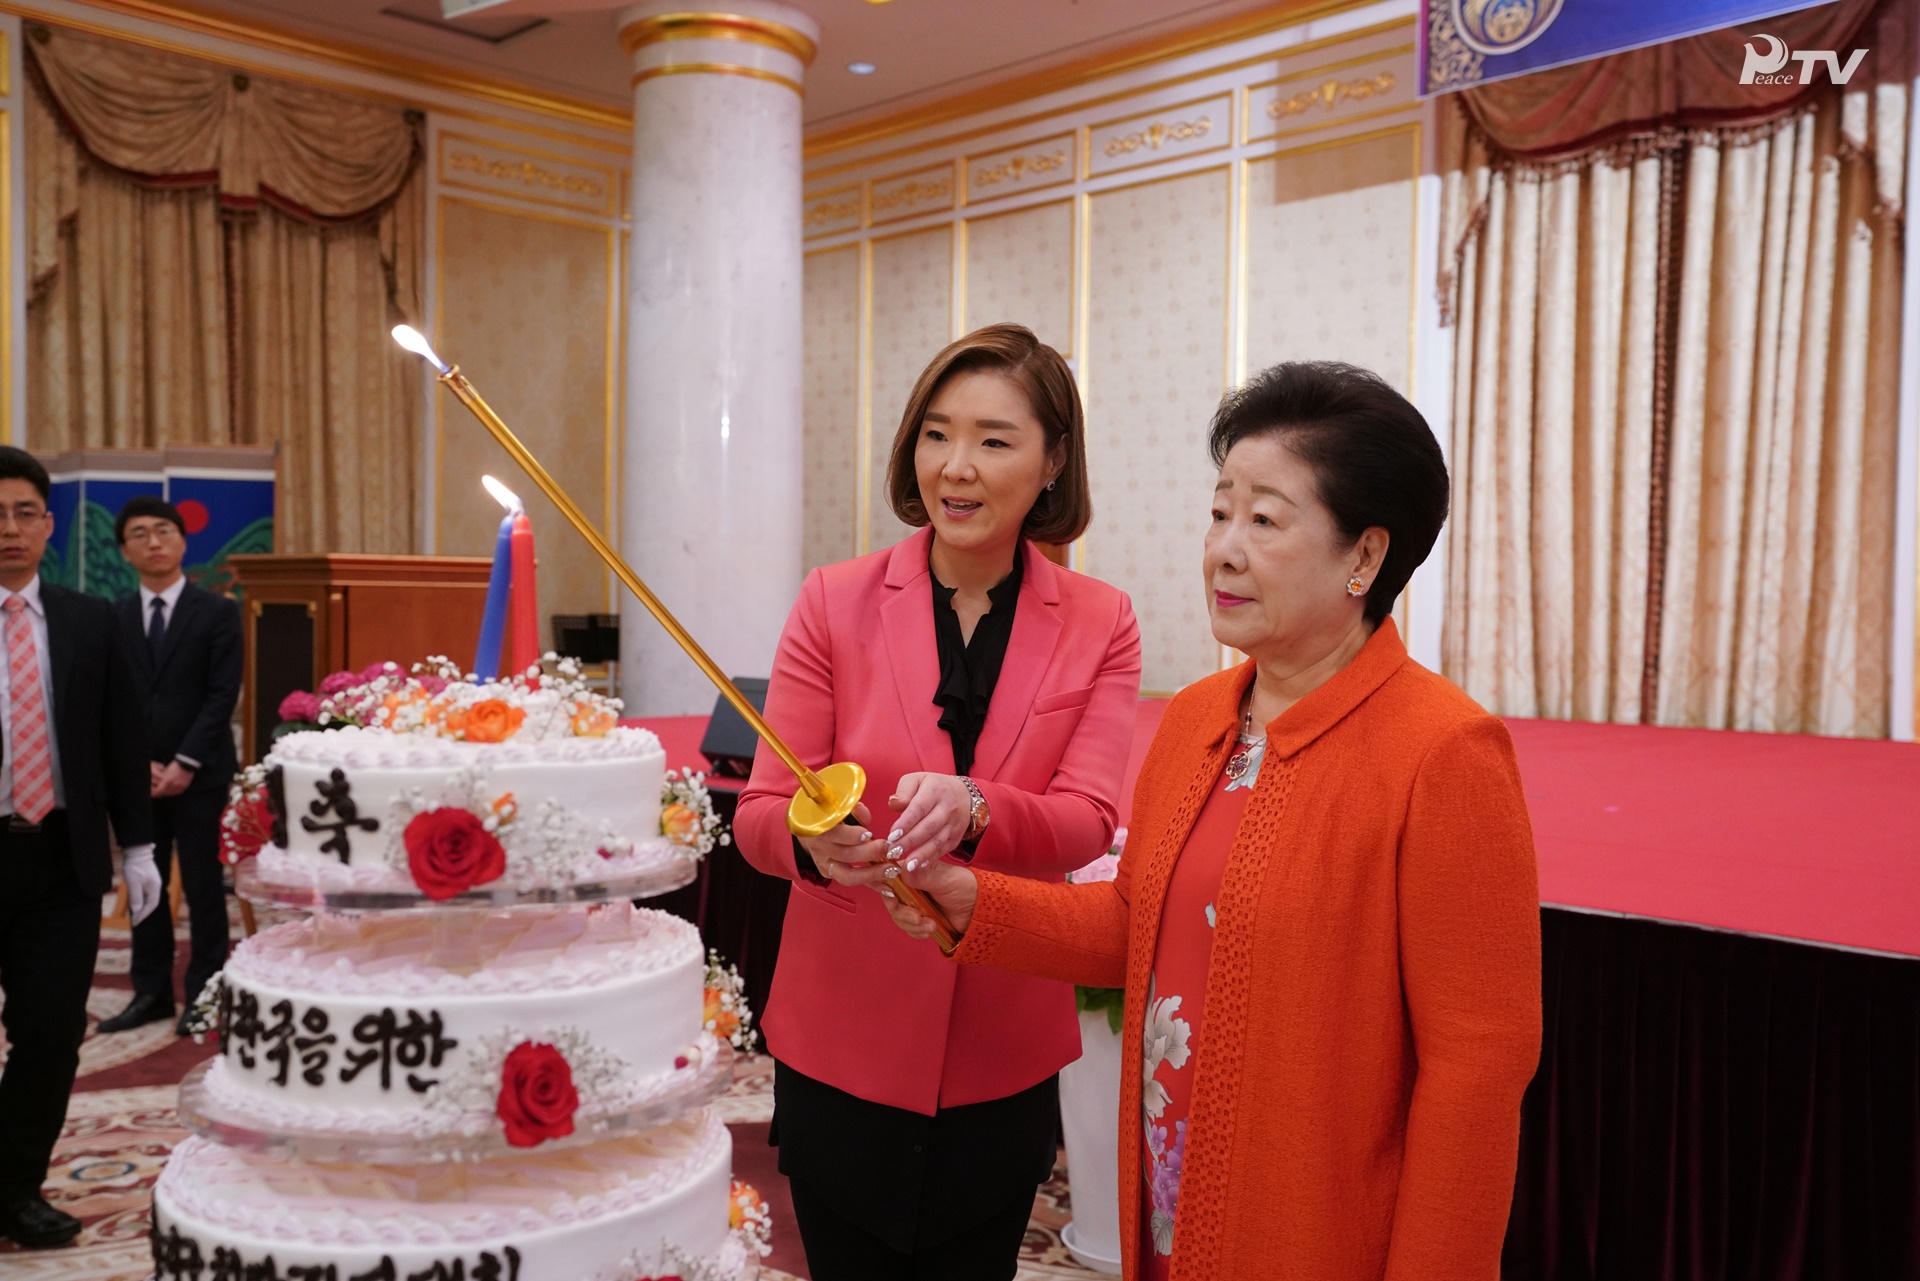 Victory Celebration for having Inherited Heavenly Fortune to Enhance the Country’s Prosperity through the 2019 Hopeful March Forward Rally for the Safe Settlement of the Era of a Heavenly Unified Korea.  May 18, Cheon Jeong Gung